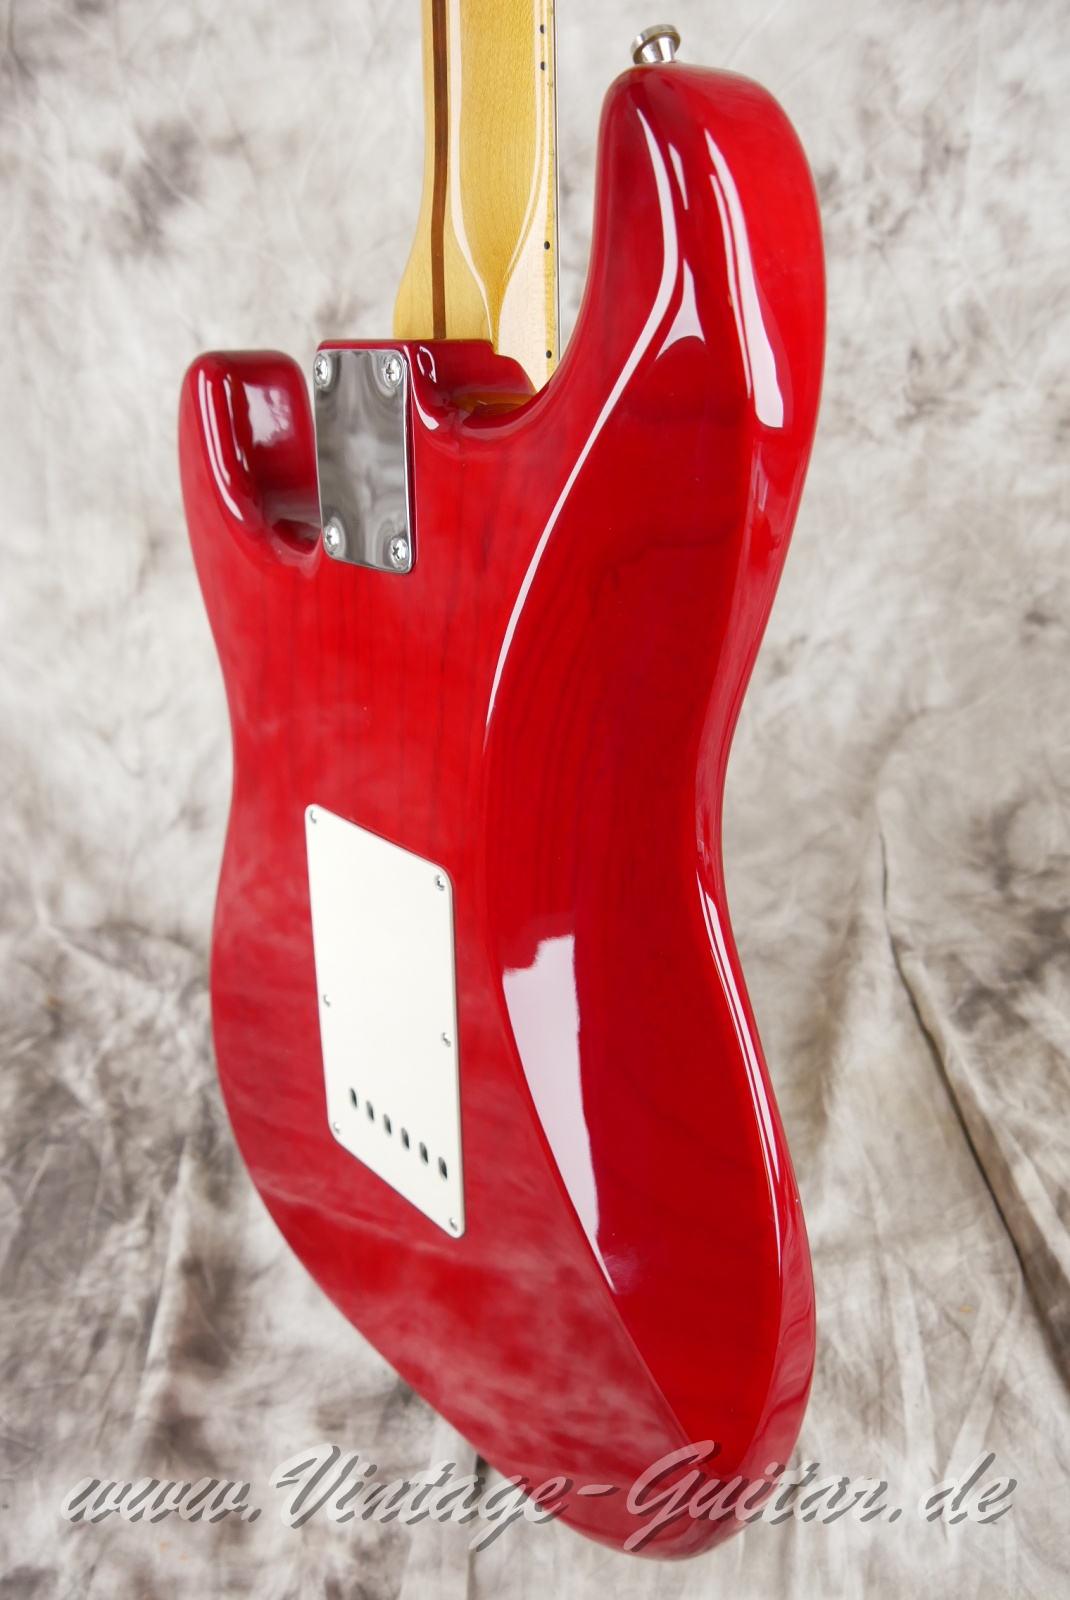 img/vintage/5650/Fender_Stratocaster_classic_50s_Mexico_transparent_red_2010-012.JPG